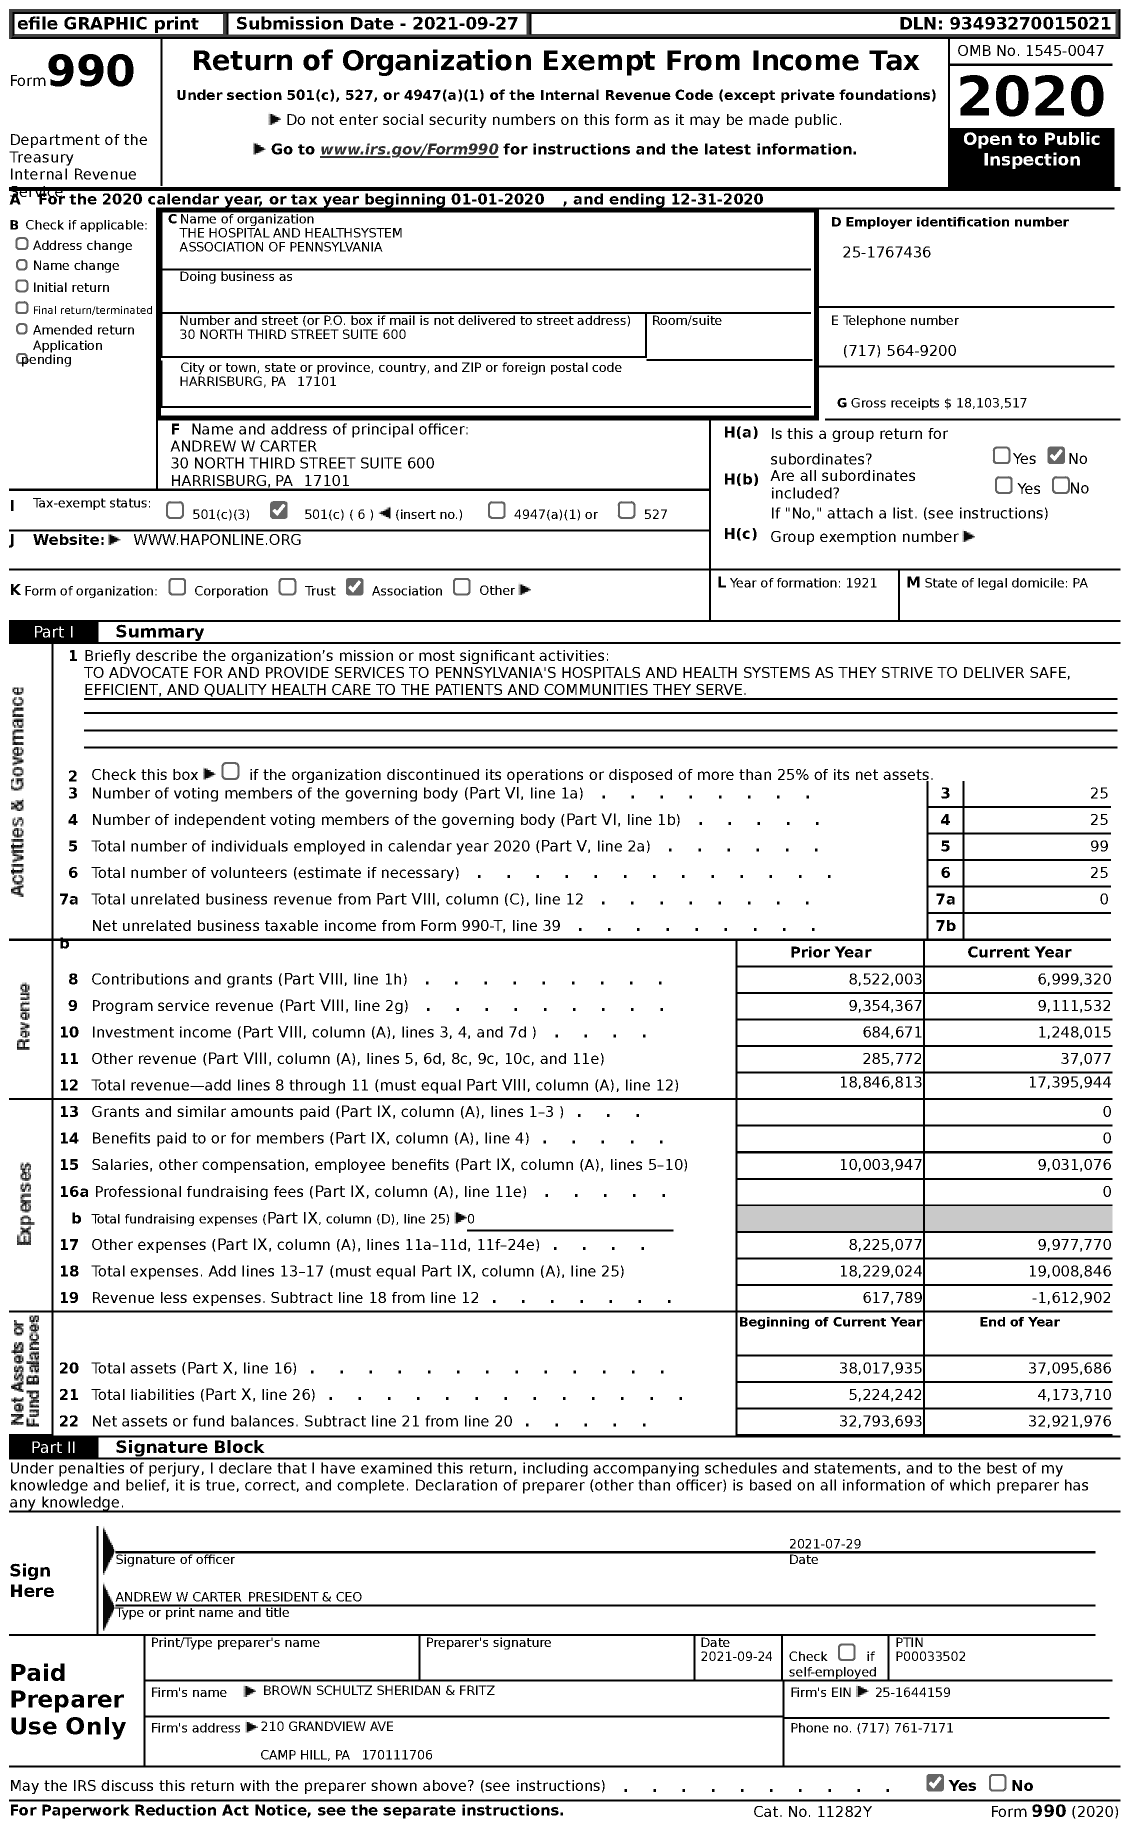 Image of first page of 2020 Form 990 for Hospital & Healthsystem Association of Pennsylvania (HAP)